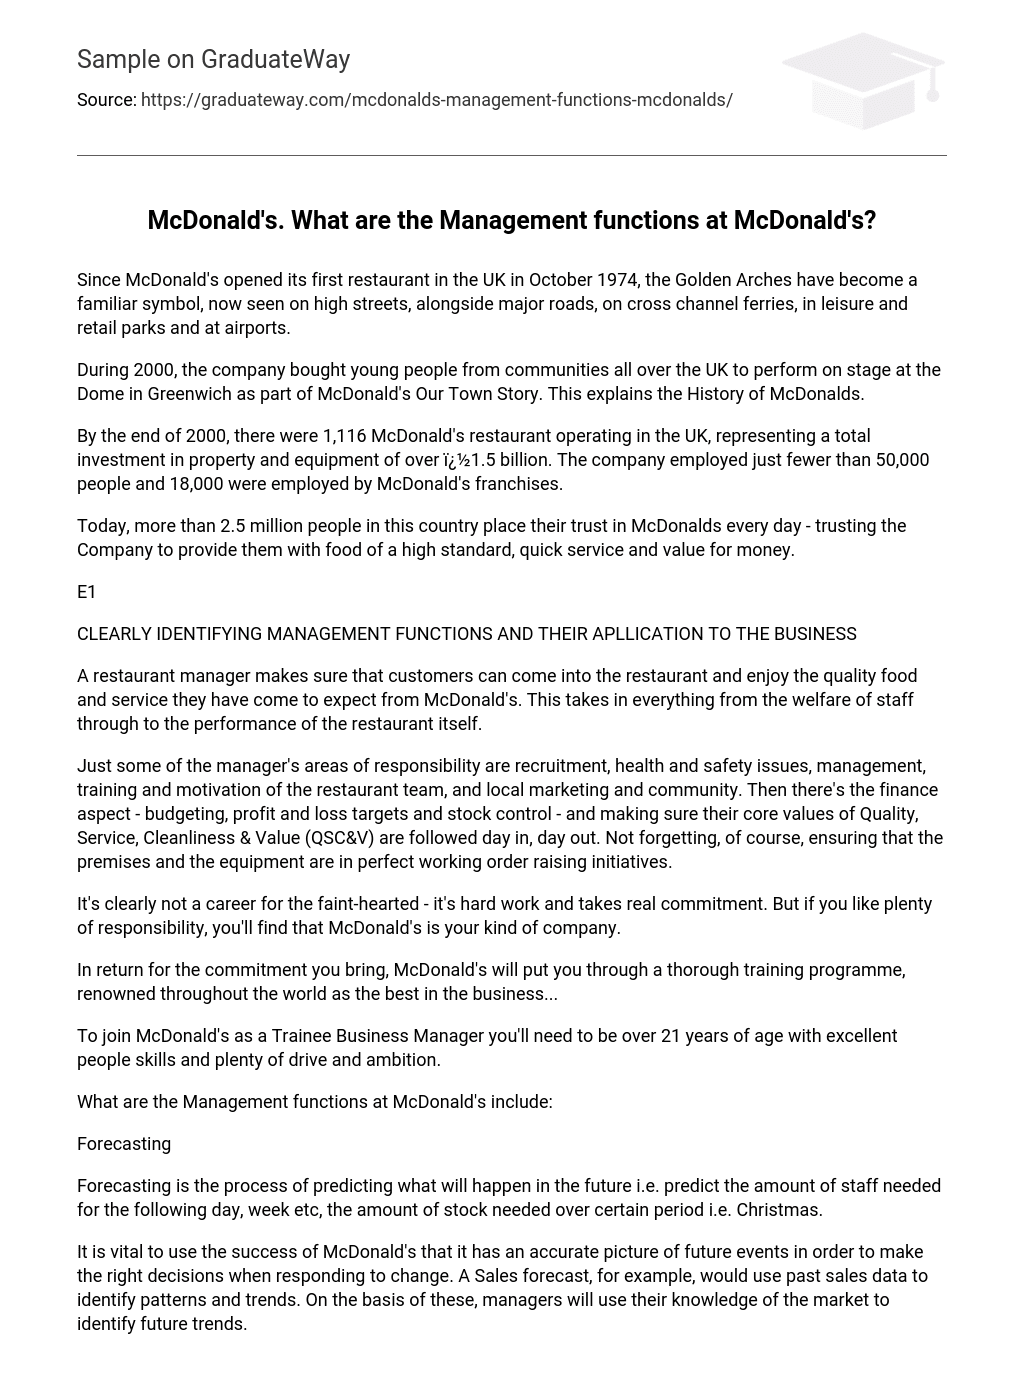 What Are The Management Functions At Mcdonald’s?